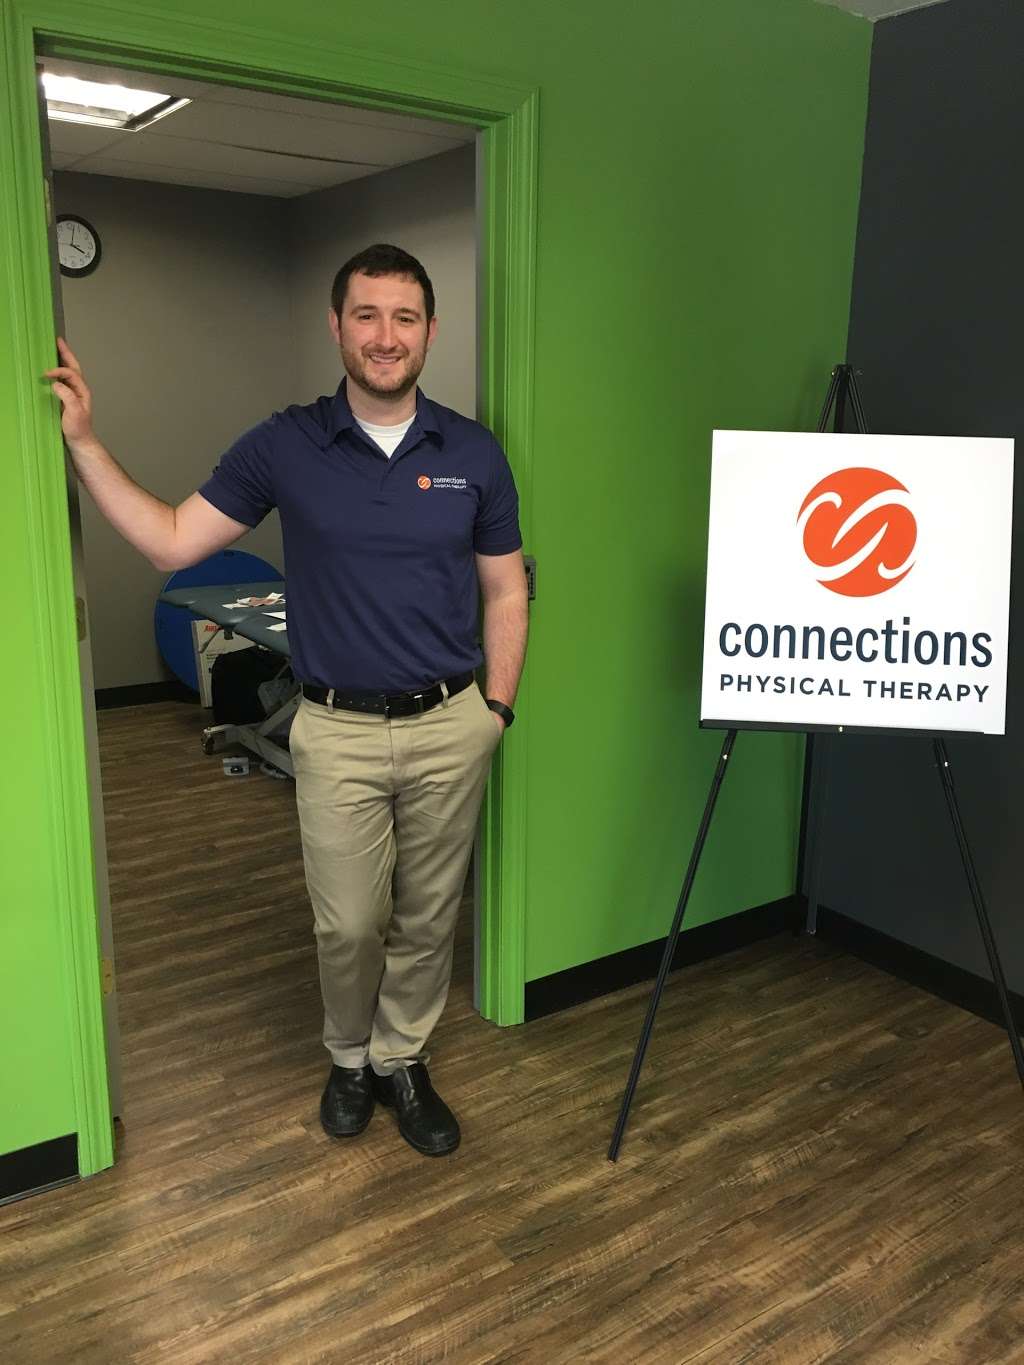 Connections Physical Therapy | 515 Daniel Webster Hwy, Merrimack, NH 03054 | Phone: (603) 424-1100